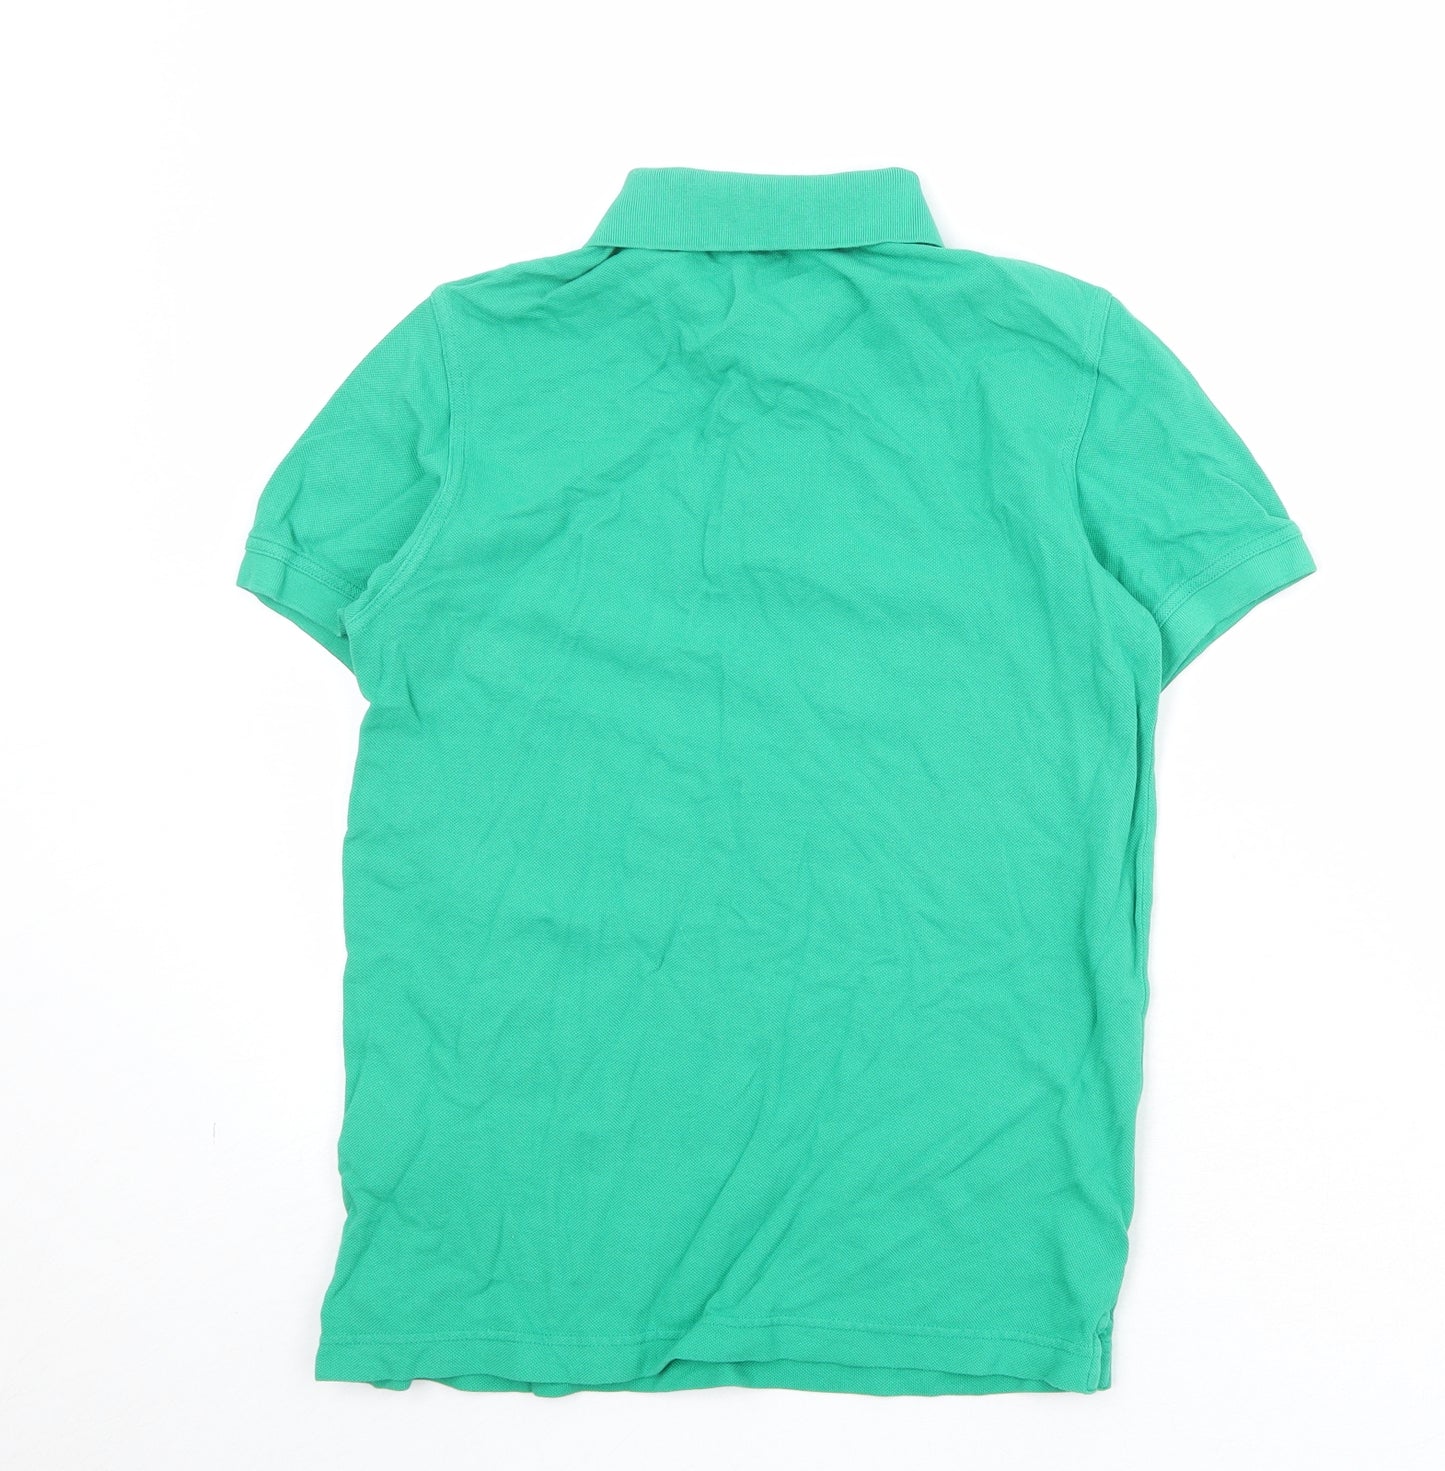 United Colors of Benetton Boys Green 100% Cotton Basic Polo Size 11-12 Years Collared Button